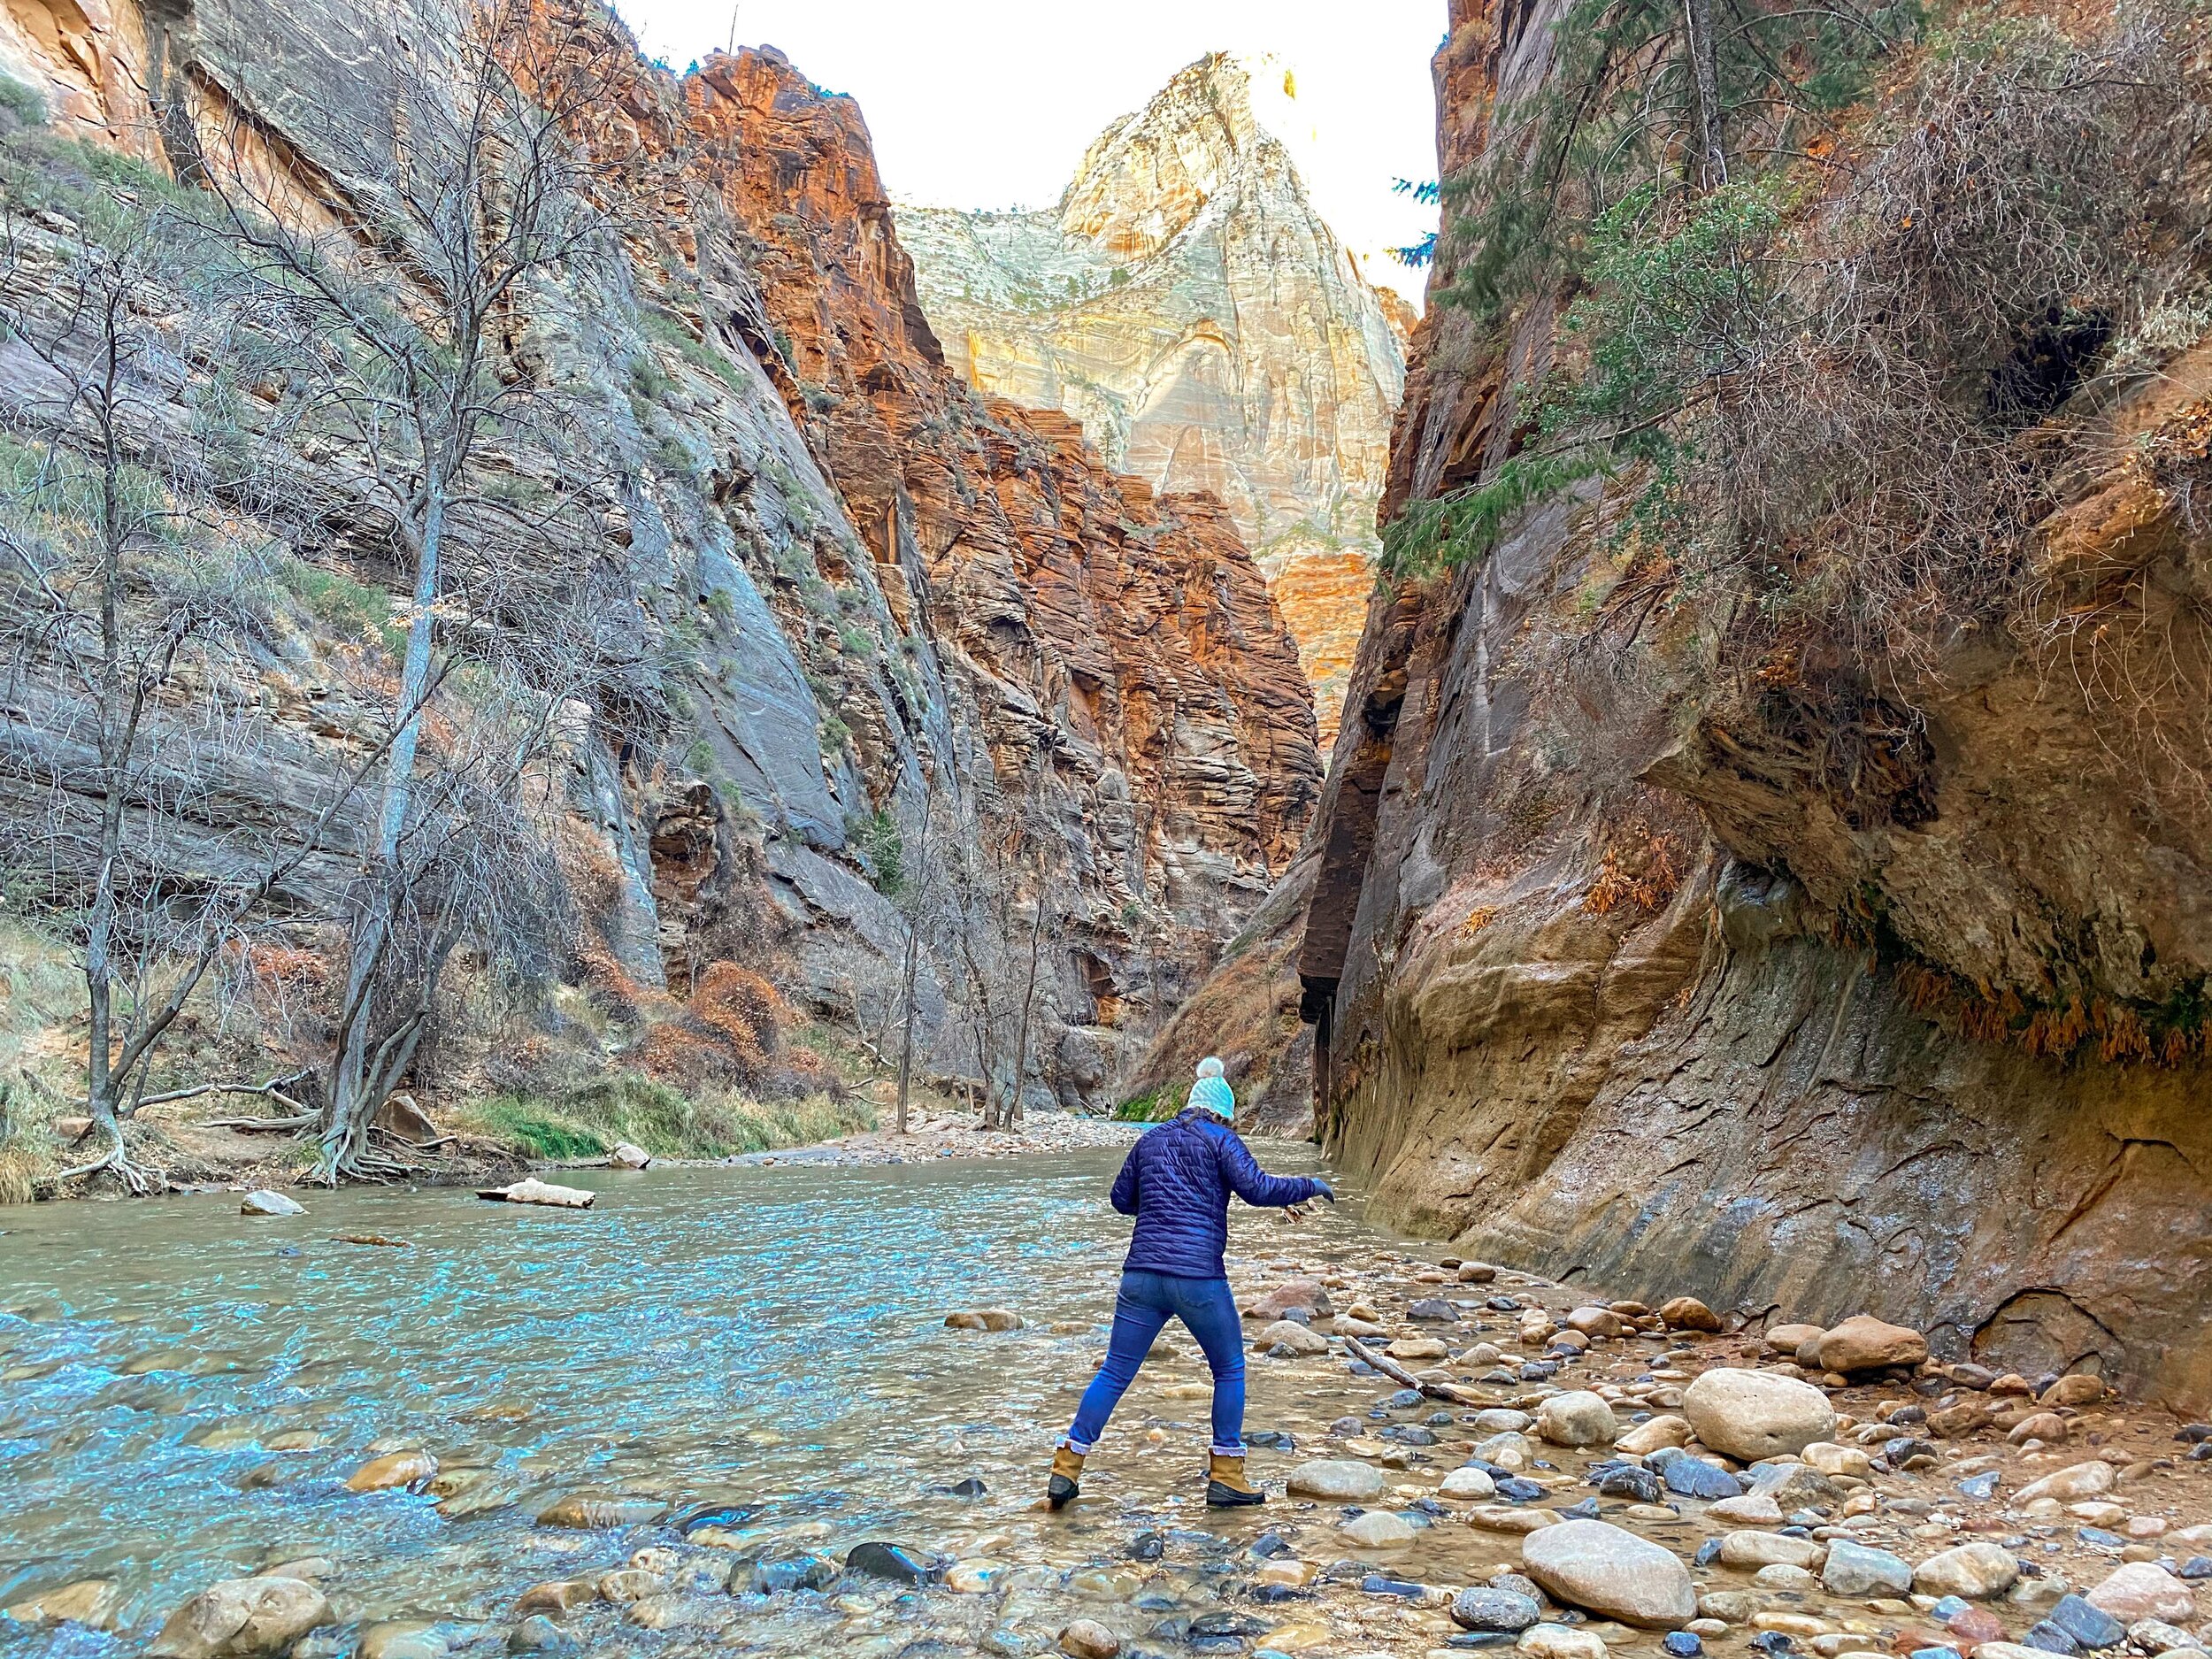 We hiked to the entrance of the narrows, but couldn’t actually hike it